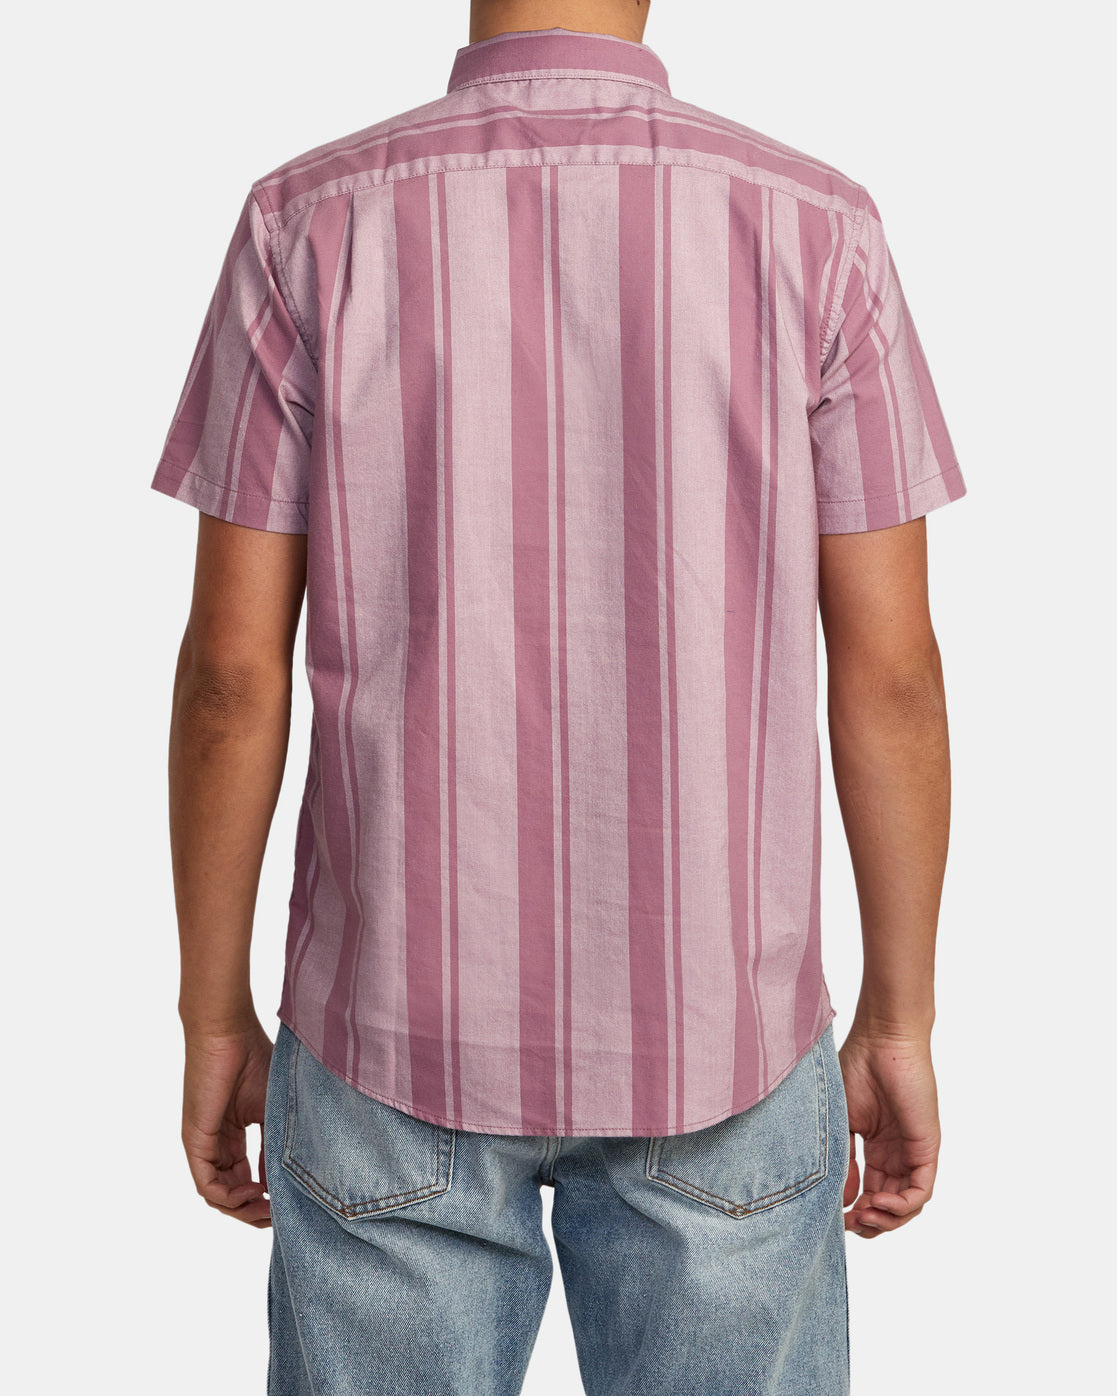 RVCA - That'll Do Stretch Stripe Short Sleeve Button Up